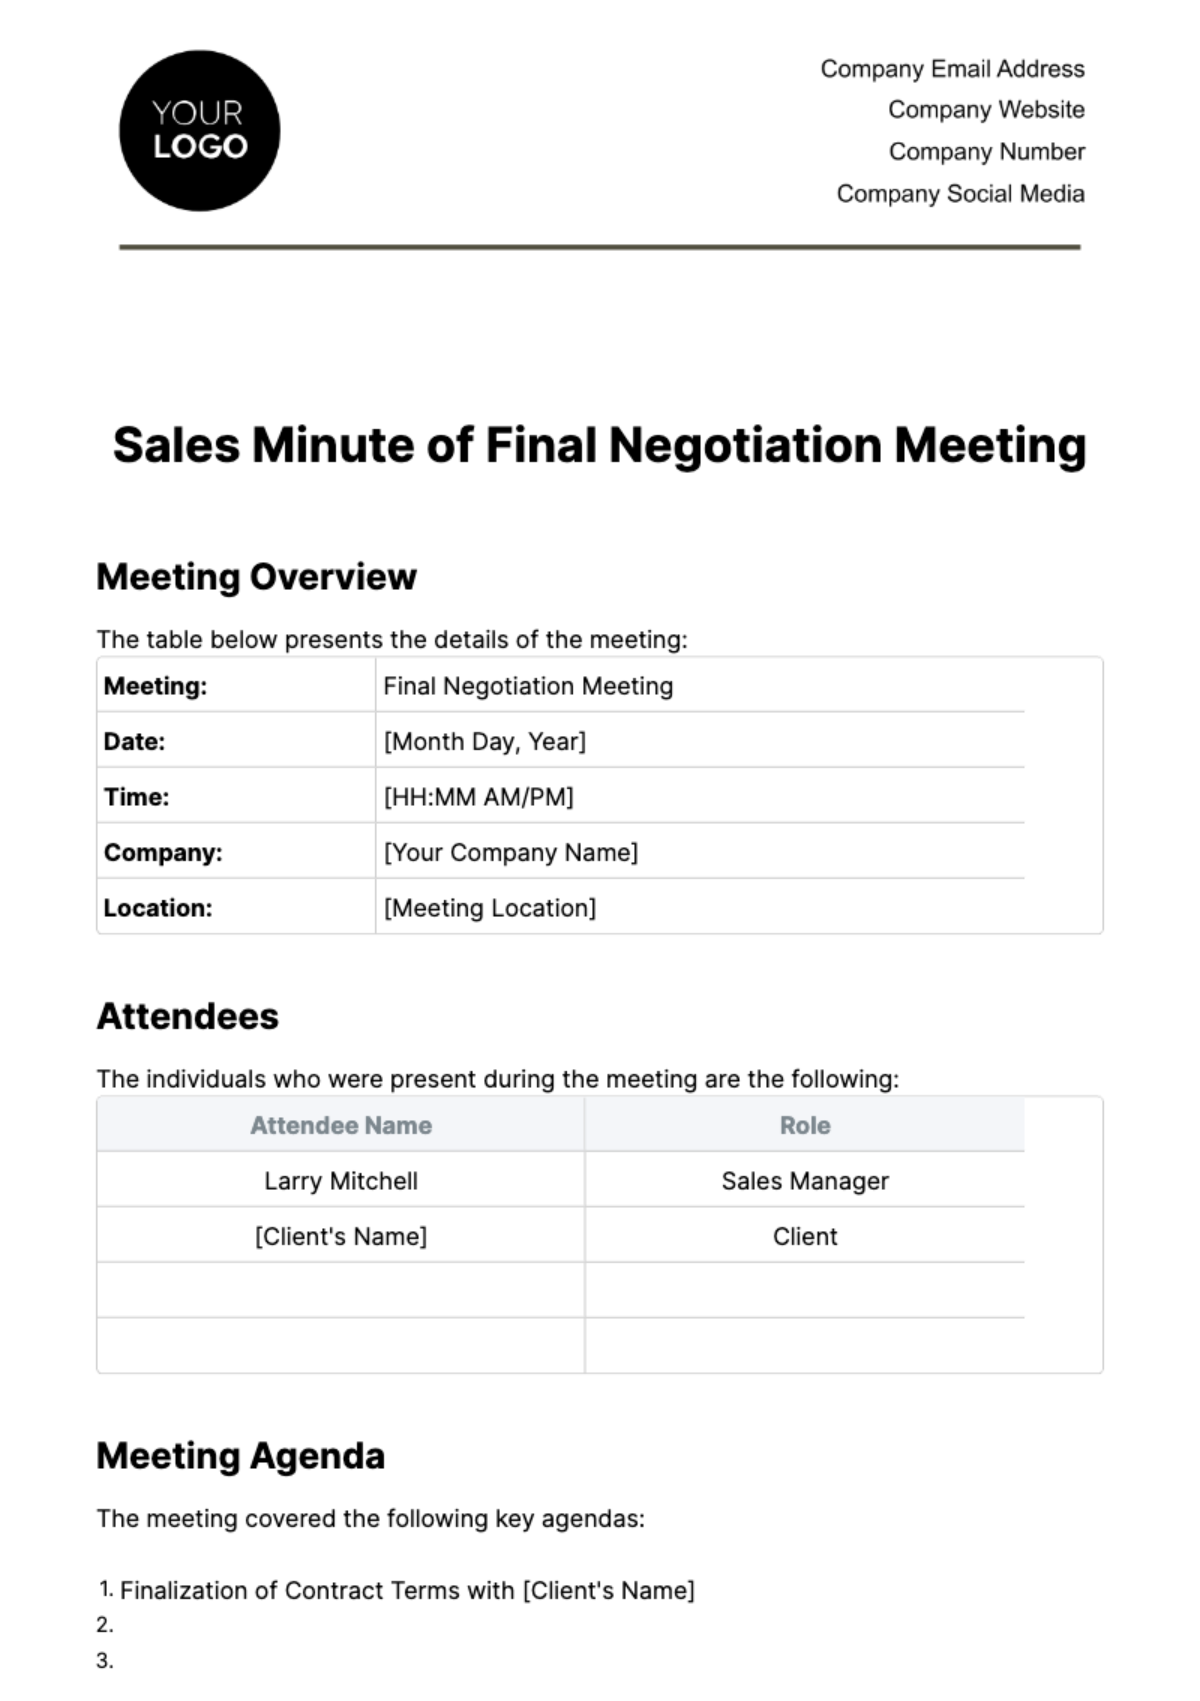 Free Sales Minute of Final Negotiation Meeting Template